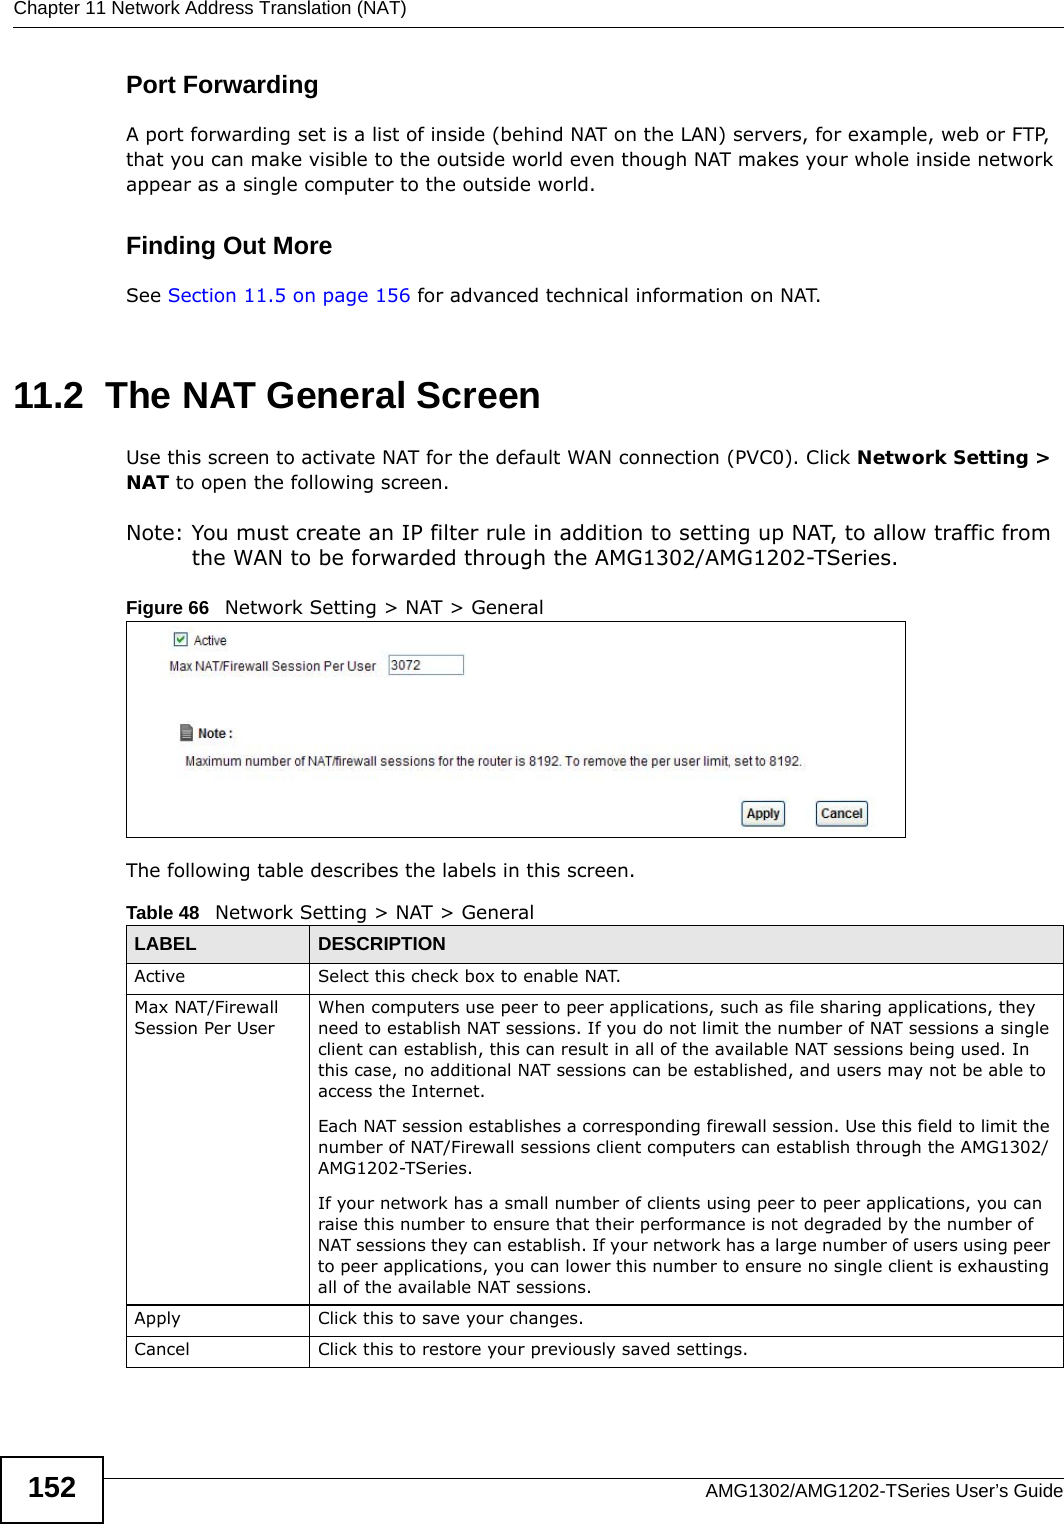 Chapter 11 Network Address Translation (NAT)AMG1302/AMG1202-TSeries User’s Guide152Port ForwardingA port forwarding set is a list of inside (behind NAT on the LAN) servers, for example, web or FTP, that you can make visible to the outside world even though NAT makes your whole inside network appear as a single computer to the outside world.Finding Out MoreSee Section 11.5 on page 156 for advanced technical information on NAT.11.2  The NAT General ScreenUse this screen to activate NAT for the default WAN connection (PVC0). Click Network Setting &gt; NAT to open the following screen.Note: You must create an IP filter rule in addition to setting up NAT, to allow traffic from the WAN to be forwarded through the AMG1302/AMG1202-TSeries.Figure 66   Network Setting &gt; NAT &gt; GeneralThe following table describes the labels in this screen.Table 48   Network Setting &gt; NAT &gt; GeneralLABEL DESCRIPTIONActive Select this check box to enable NAT.Max NAT/Firewall Session Per UserWhen computers use peer to peer applications, such as file sharing applications, they need to establish NAT sessions. If you do not limit the number of NAT sessions a single client can establish, this can result in all of the available NAT sessions being used. In this case, no additional NAT sessions can be established, and users may not be able to access the Internet.Each NAT session establishes a corresponding firewall session. Use this field to limit the number of NAT/Firewall sessions client computers can establish through the AMG1302/AMG1202-TSeries.If your network has a small number of clients using peer to peer applications, you can raise this number to ensure that their performance is not degraded by the number of NAT sessions they can establish. If your network has a large number of users using peer to peer applications, you can lower this number to ensure no single client is exhausting all of the available NAT sessions.Apply Click this to save your changes.Cancel Click this to restore your previously saved settings.